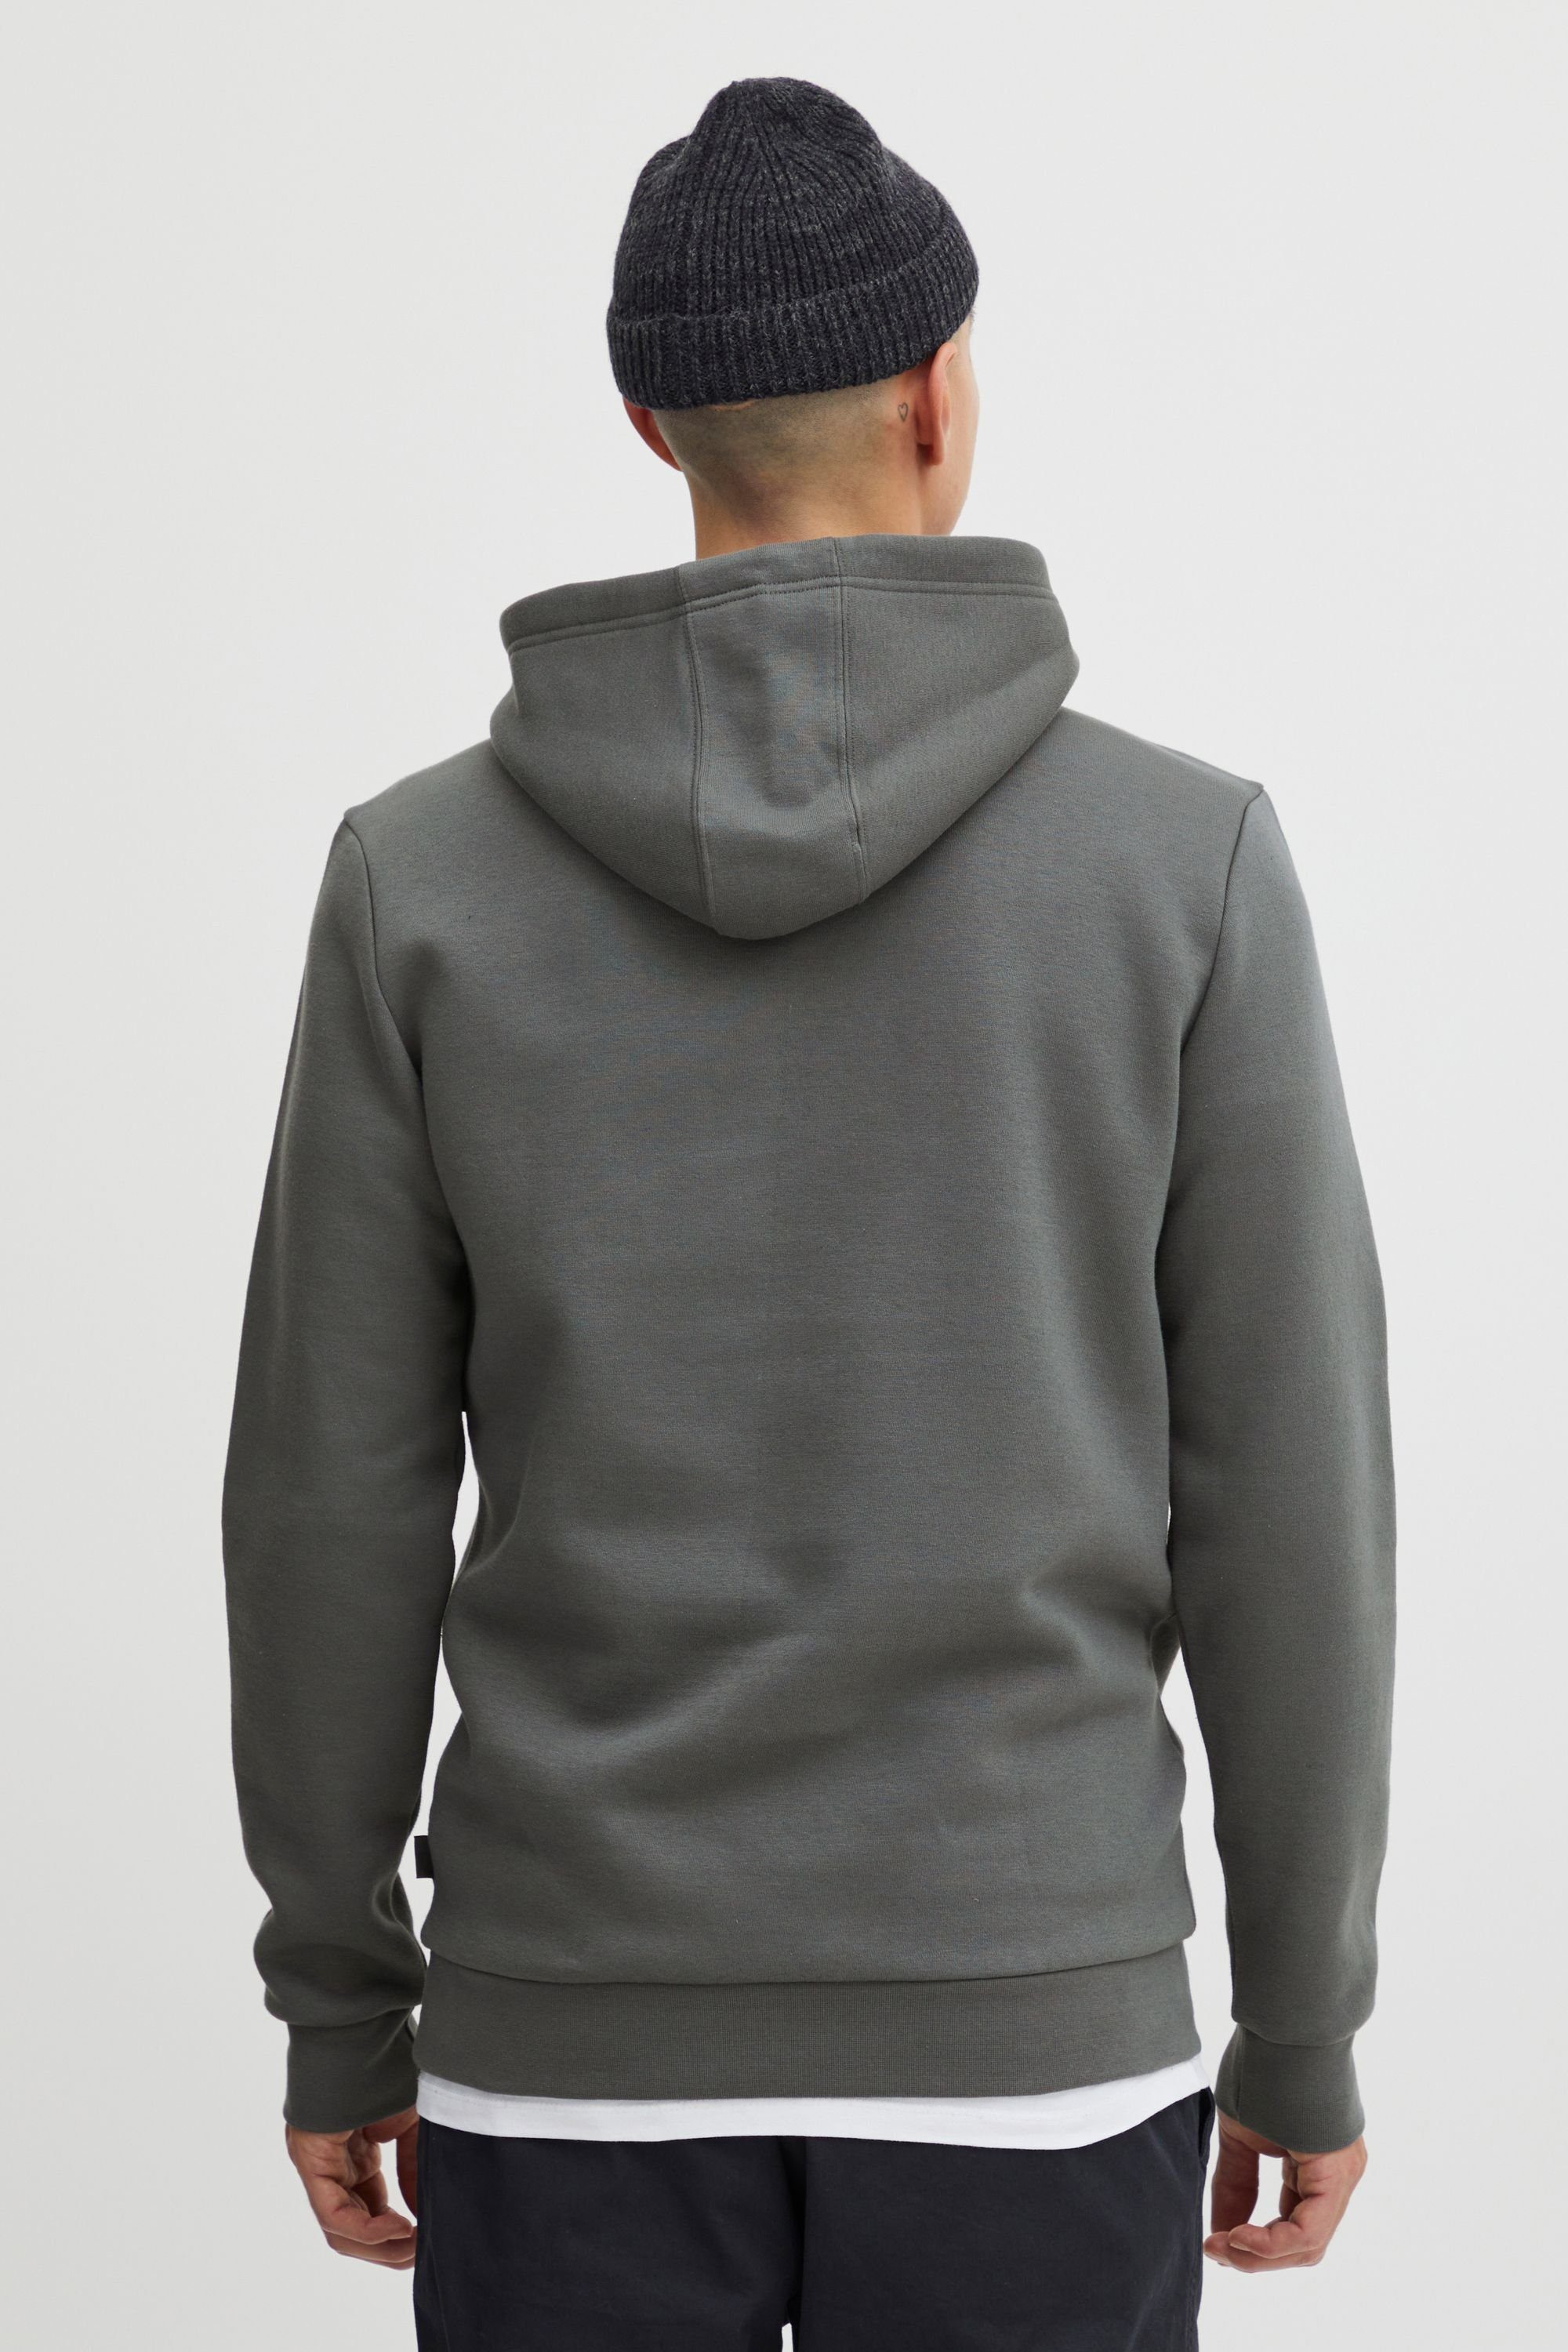 Gate Project 11 Project 11 Hoodie PRAnno Iron